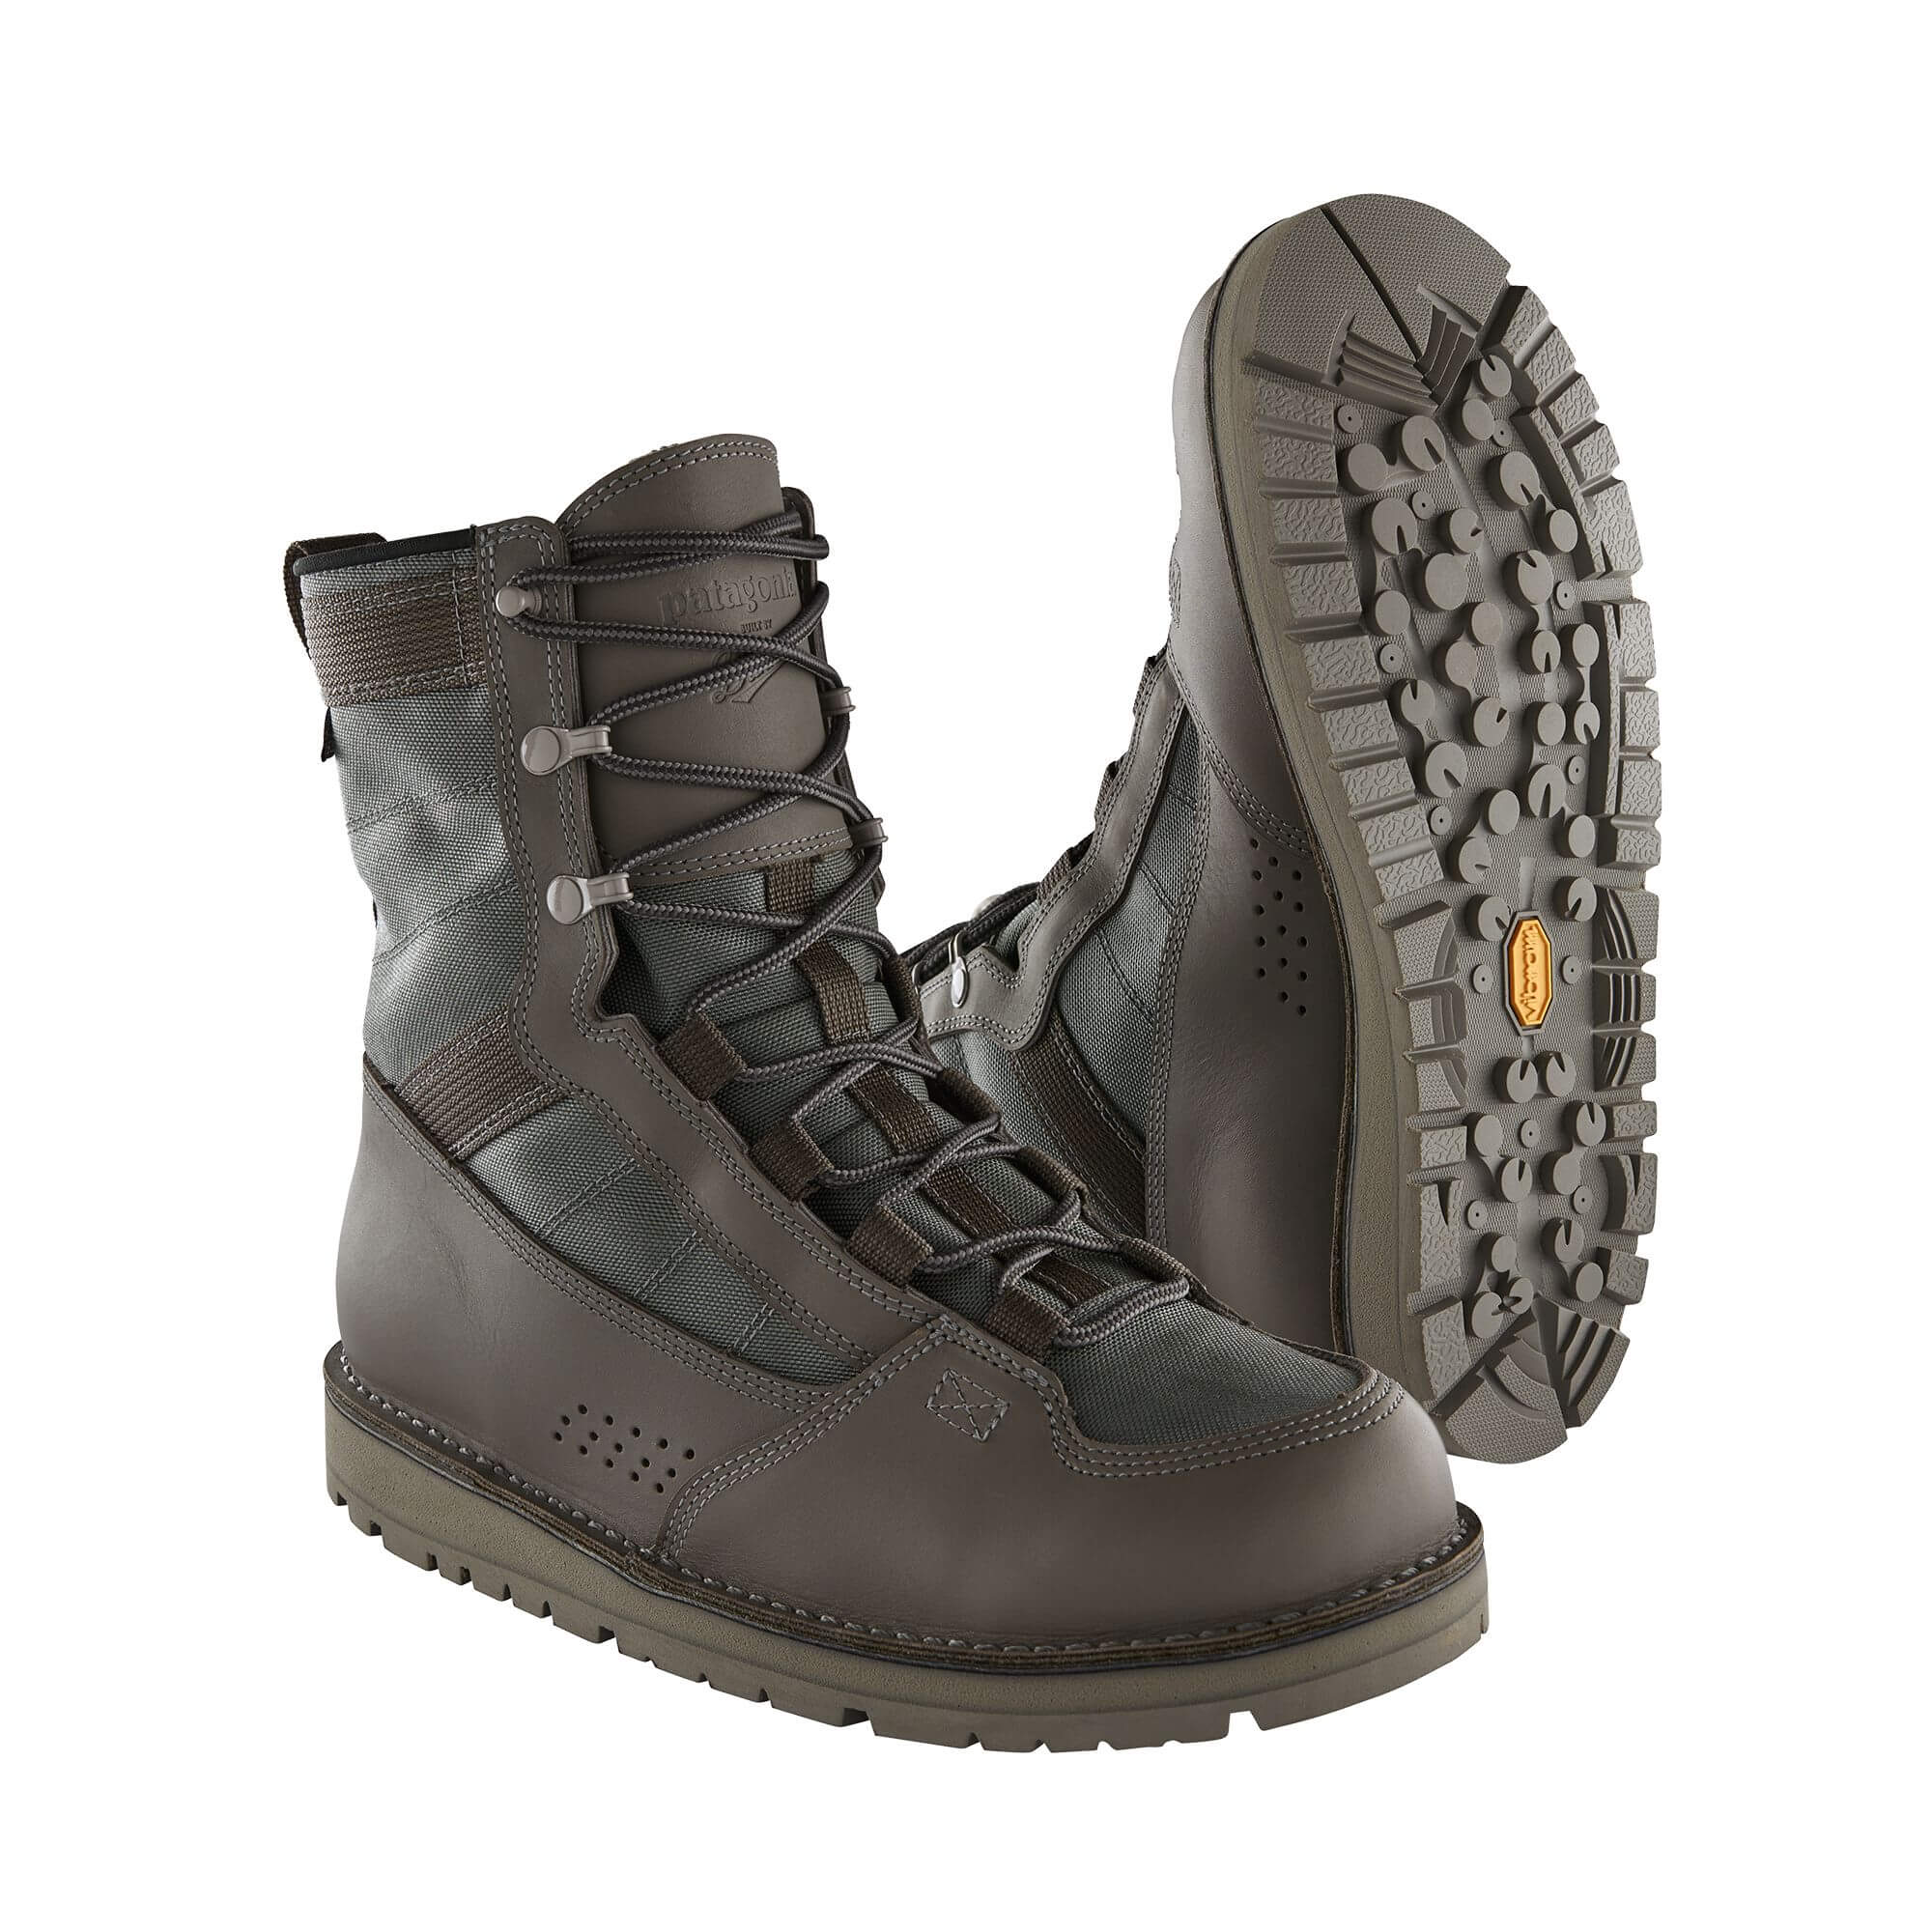 Patagonia River Salt Wading Boot (by Danner) - 13